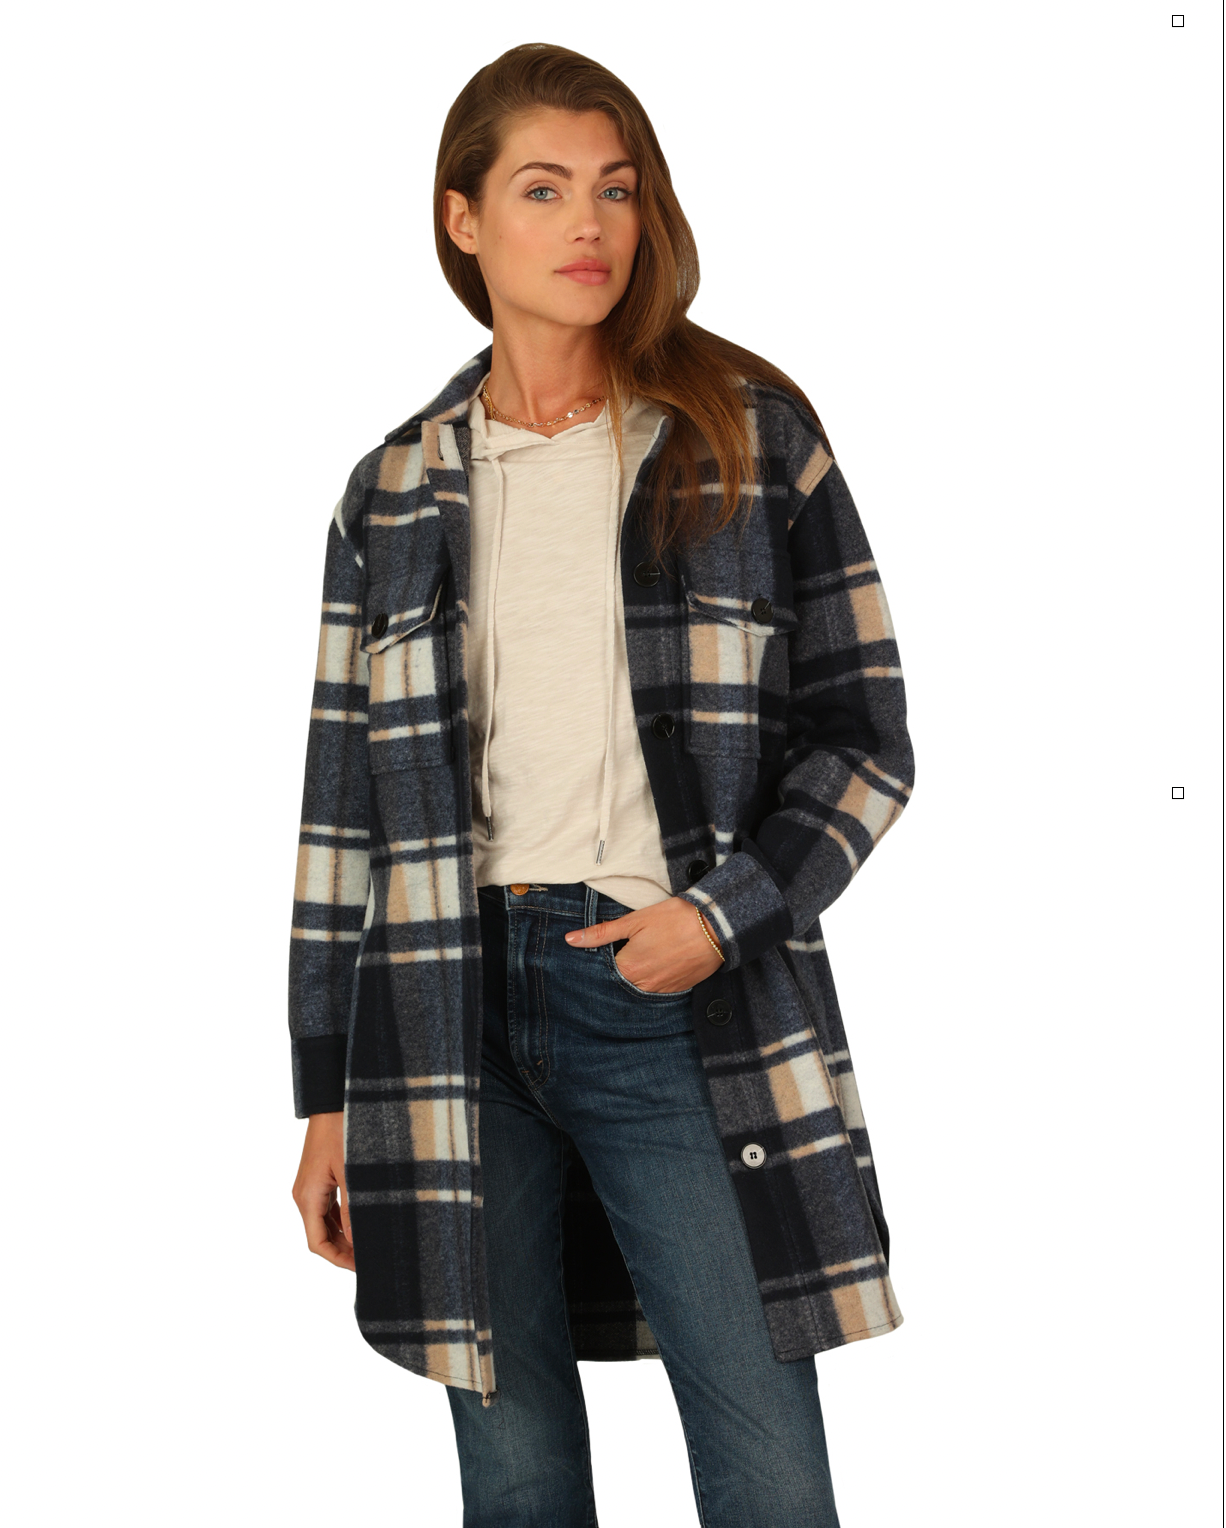 Model wearing Dylan Plaid Claire overcoat in midnight blue wearing jeans on a white background